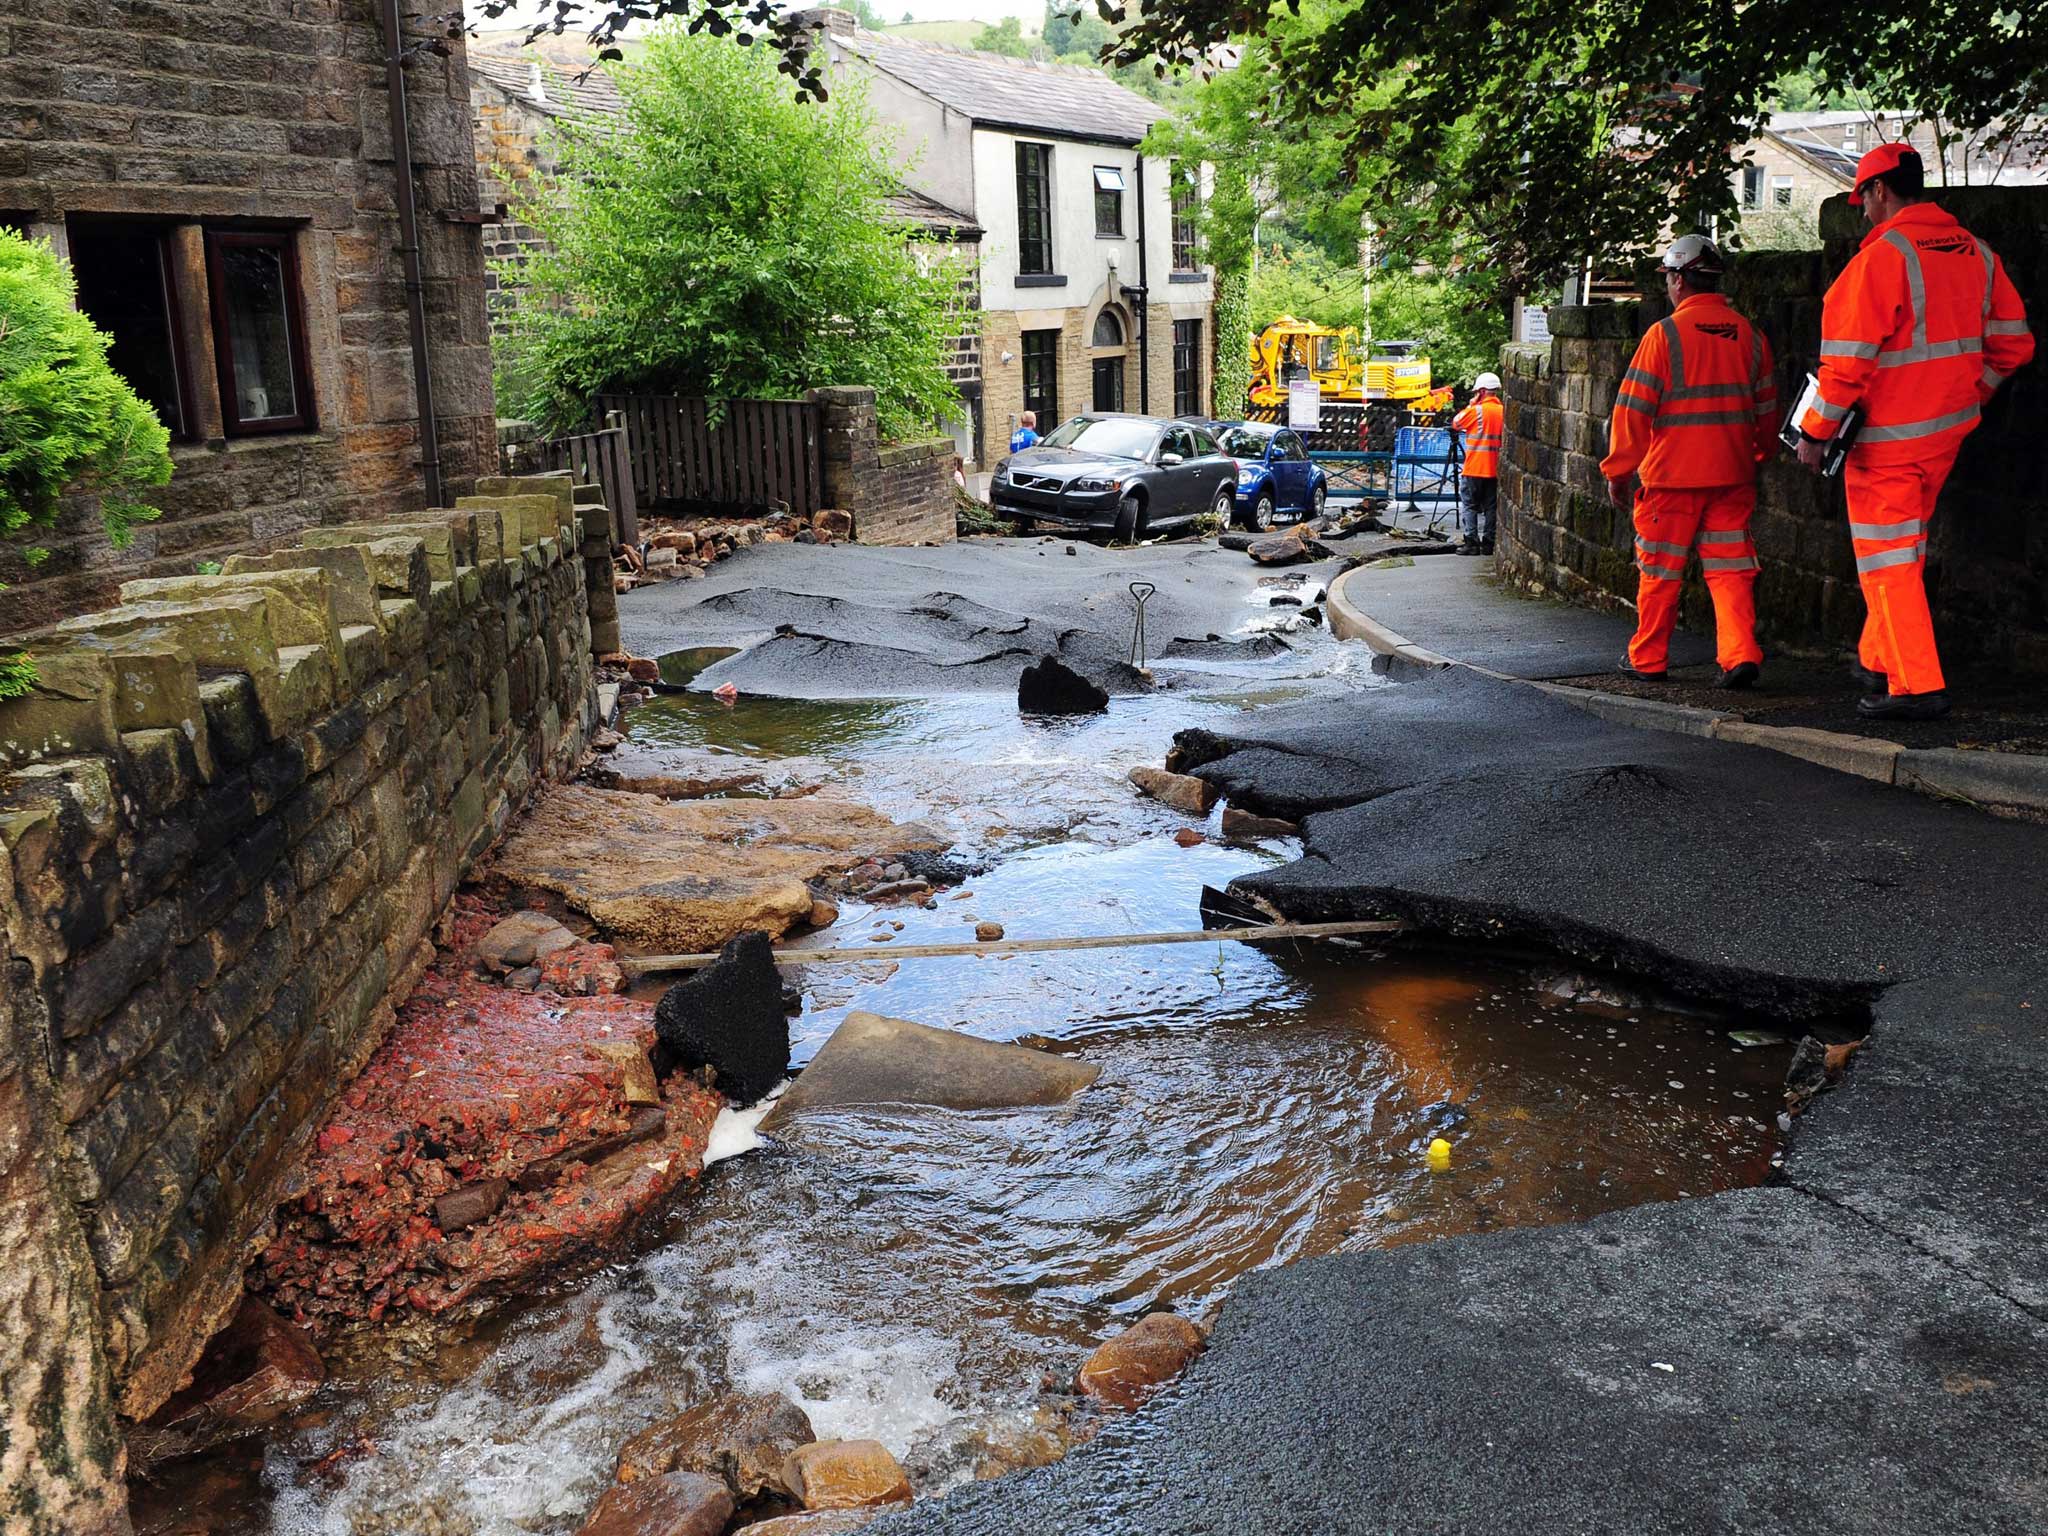 Engineers examine the damage left by flash floods in Walsden, near Todmorden